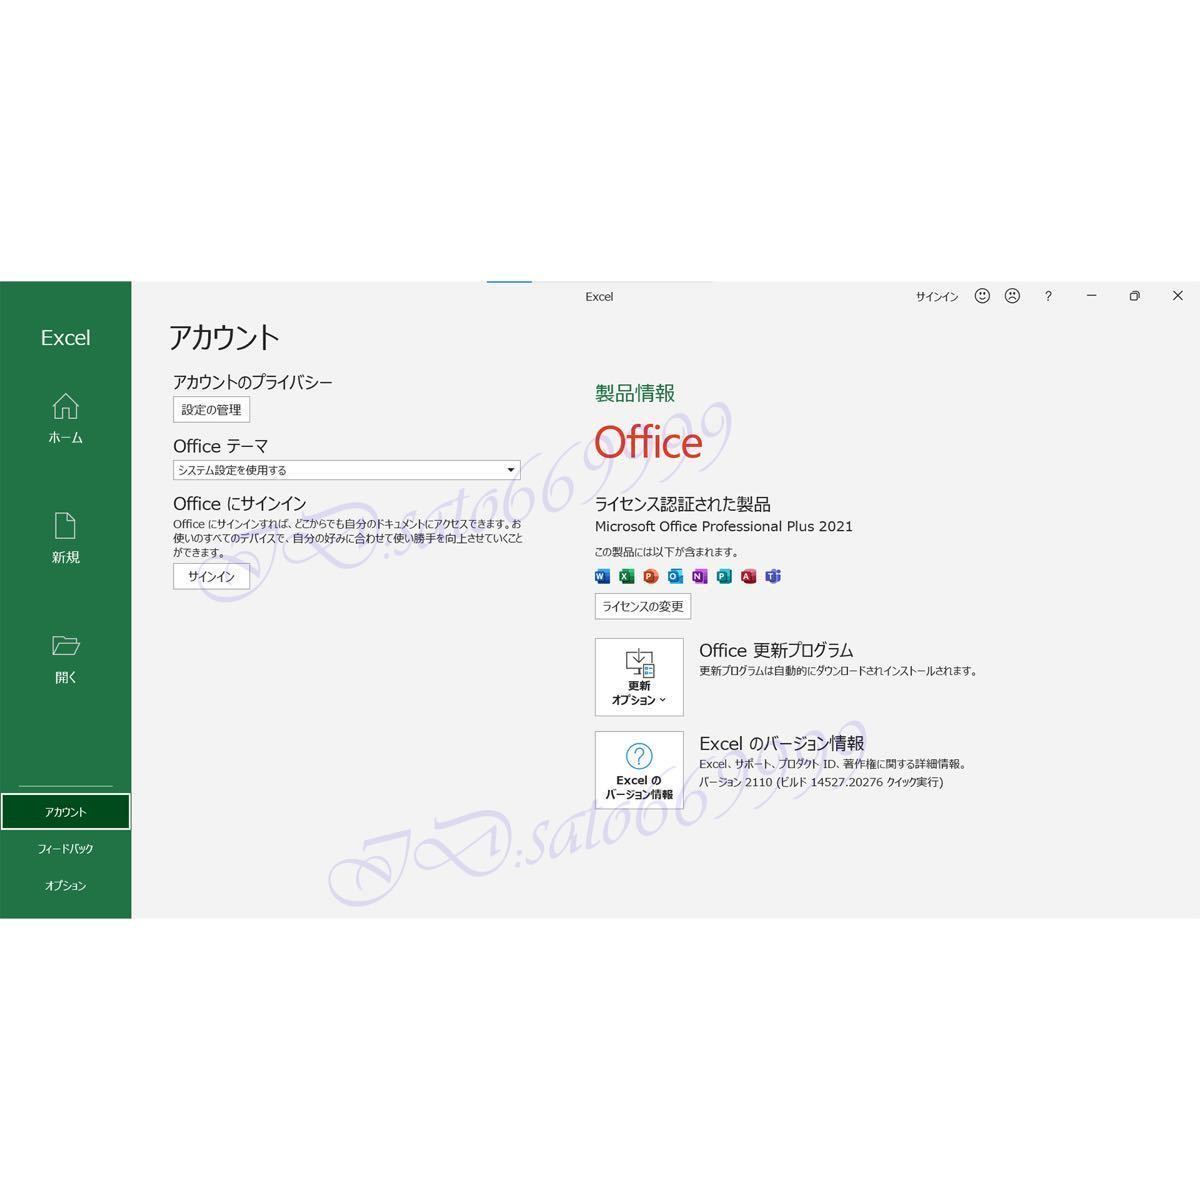 Microsoft Office2021 Professional Plusプロダクトキー日本語 正規認証保証Word Excel PowerPoint Access 安心サポート付き　水_画像6